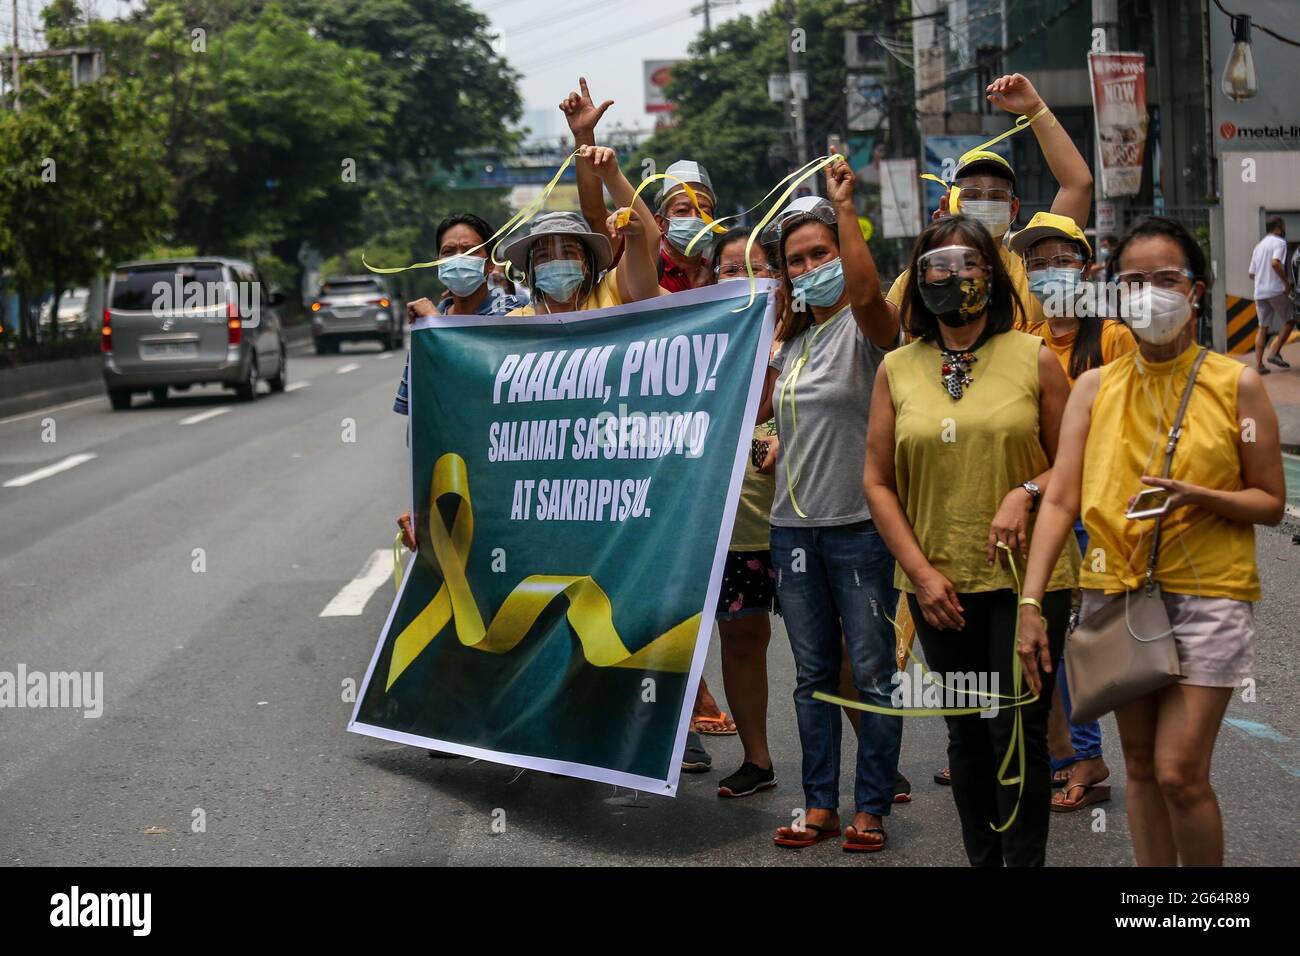 Supporters carry signs as they gather beside the motorcade of former Philippine President Benigno Aquino III before his burial in Quezon City, Philippines. Stock Photo